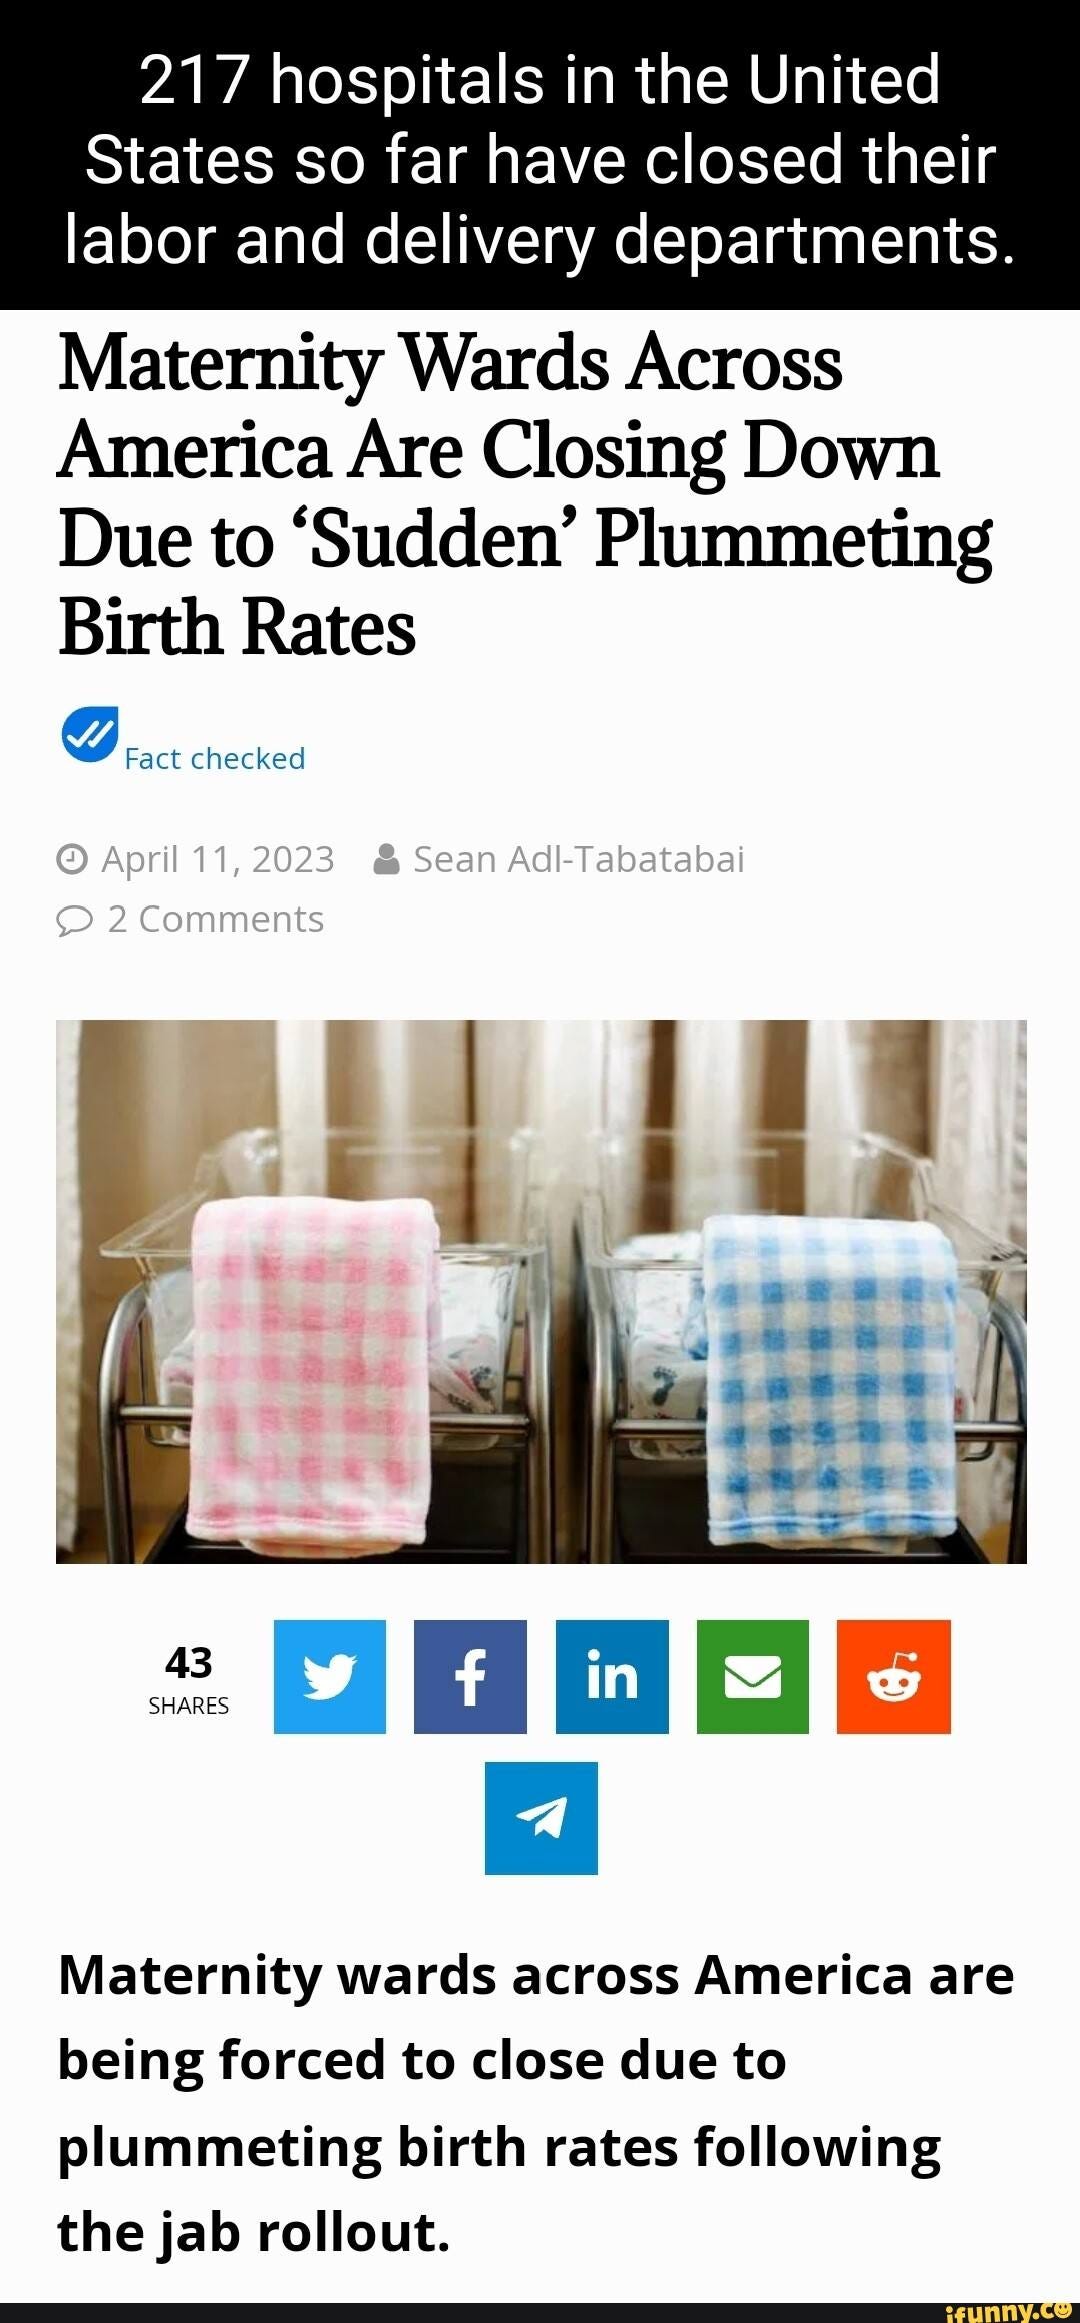 May be an image of towel and text that says '217 hospitals in the United States so far have closed their labor and delivery departments. Maternity Wards Across America Are Closing Down Due to 'Sudden' Plummeting Birth Rates Fact checked à April 11 2023 Comments Sean Adl- Tabatabai 43 SHARES f in Maternity wards across America are being forced to close due to plummeting birth rates following the jab rollout.'